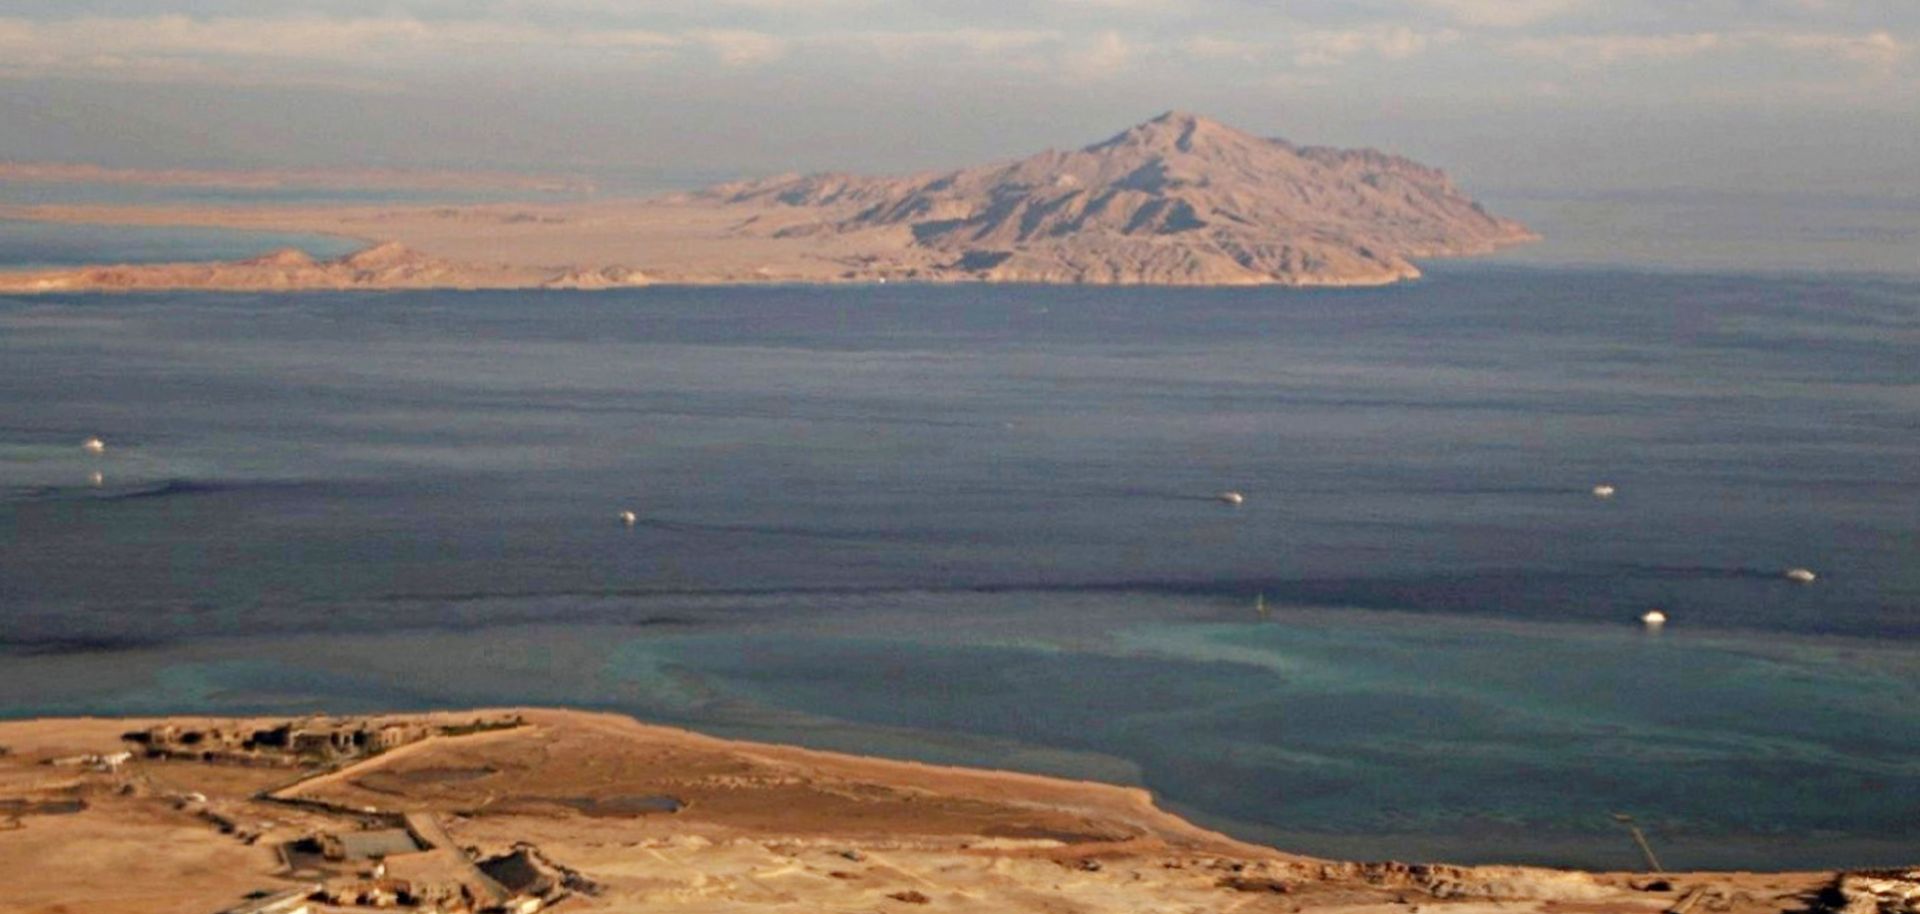 In April, Egyptian President Abdel Fattah al-Sisi signed a deal to transfer control of the Red Sea islands of Sanafir and Tiran to Saudi Arabia, hoping to win economic concessions, finance and investment from Riyadh.